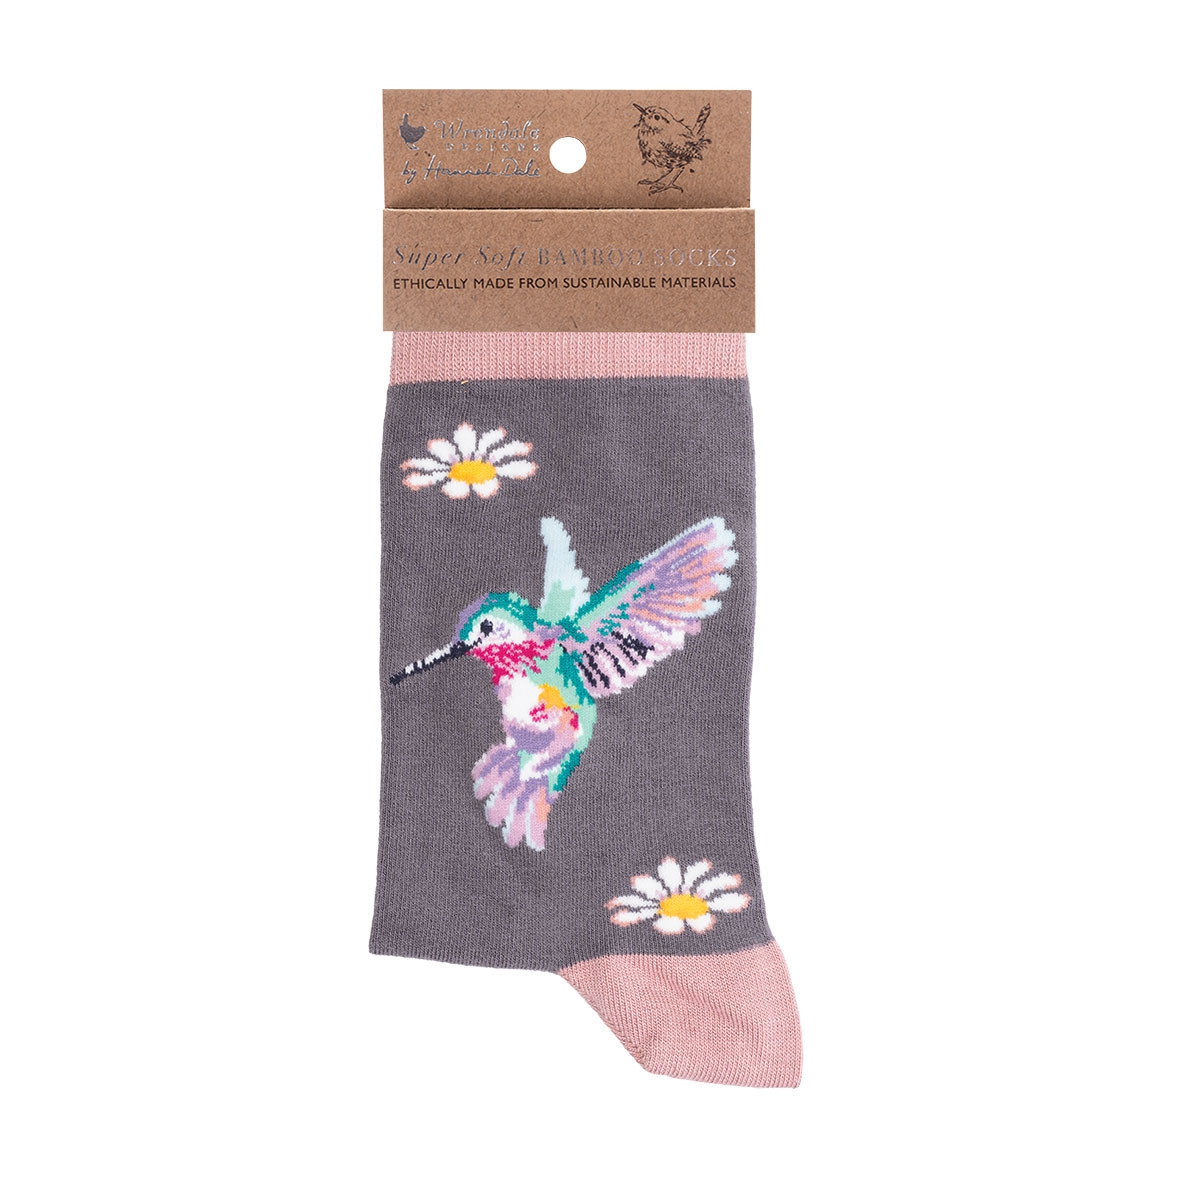 Chaussettes Colibri "Wisteria Wishes" taille femme Wrendale Designs